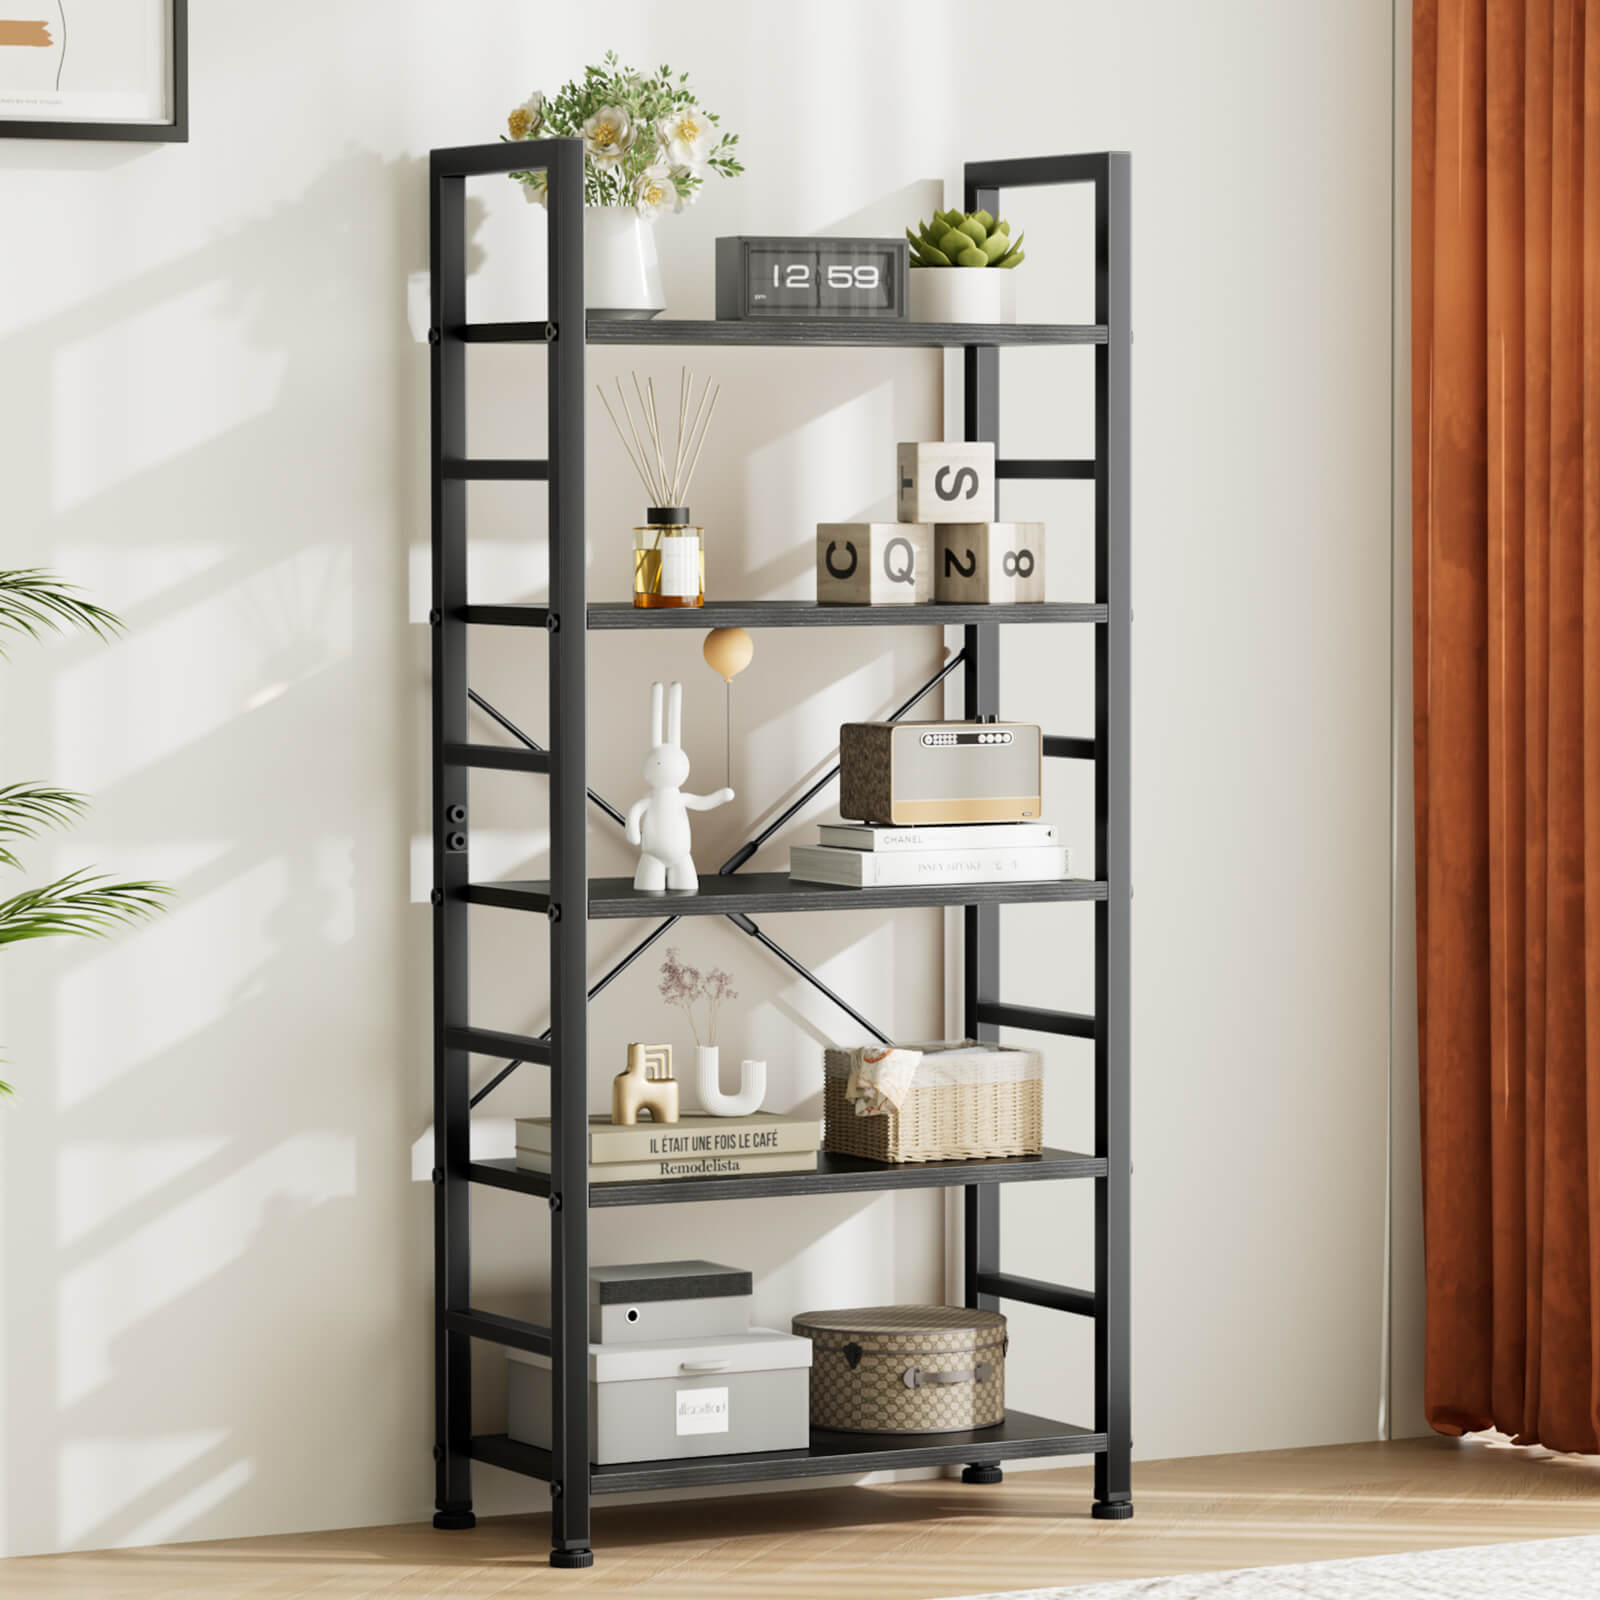 5-Tier Bookcase - Tall Bookshelf Modern Book Case for Books, Garage Kit, CDs, Movies,  for Bedroom Home Office Kitchen Living Room